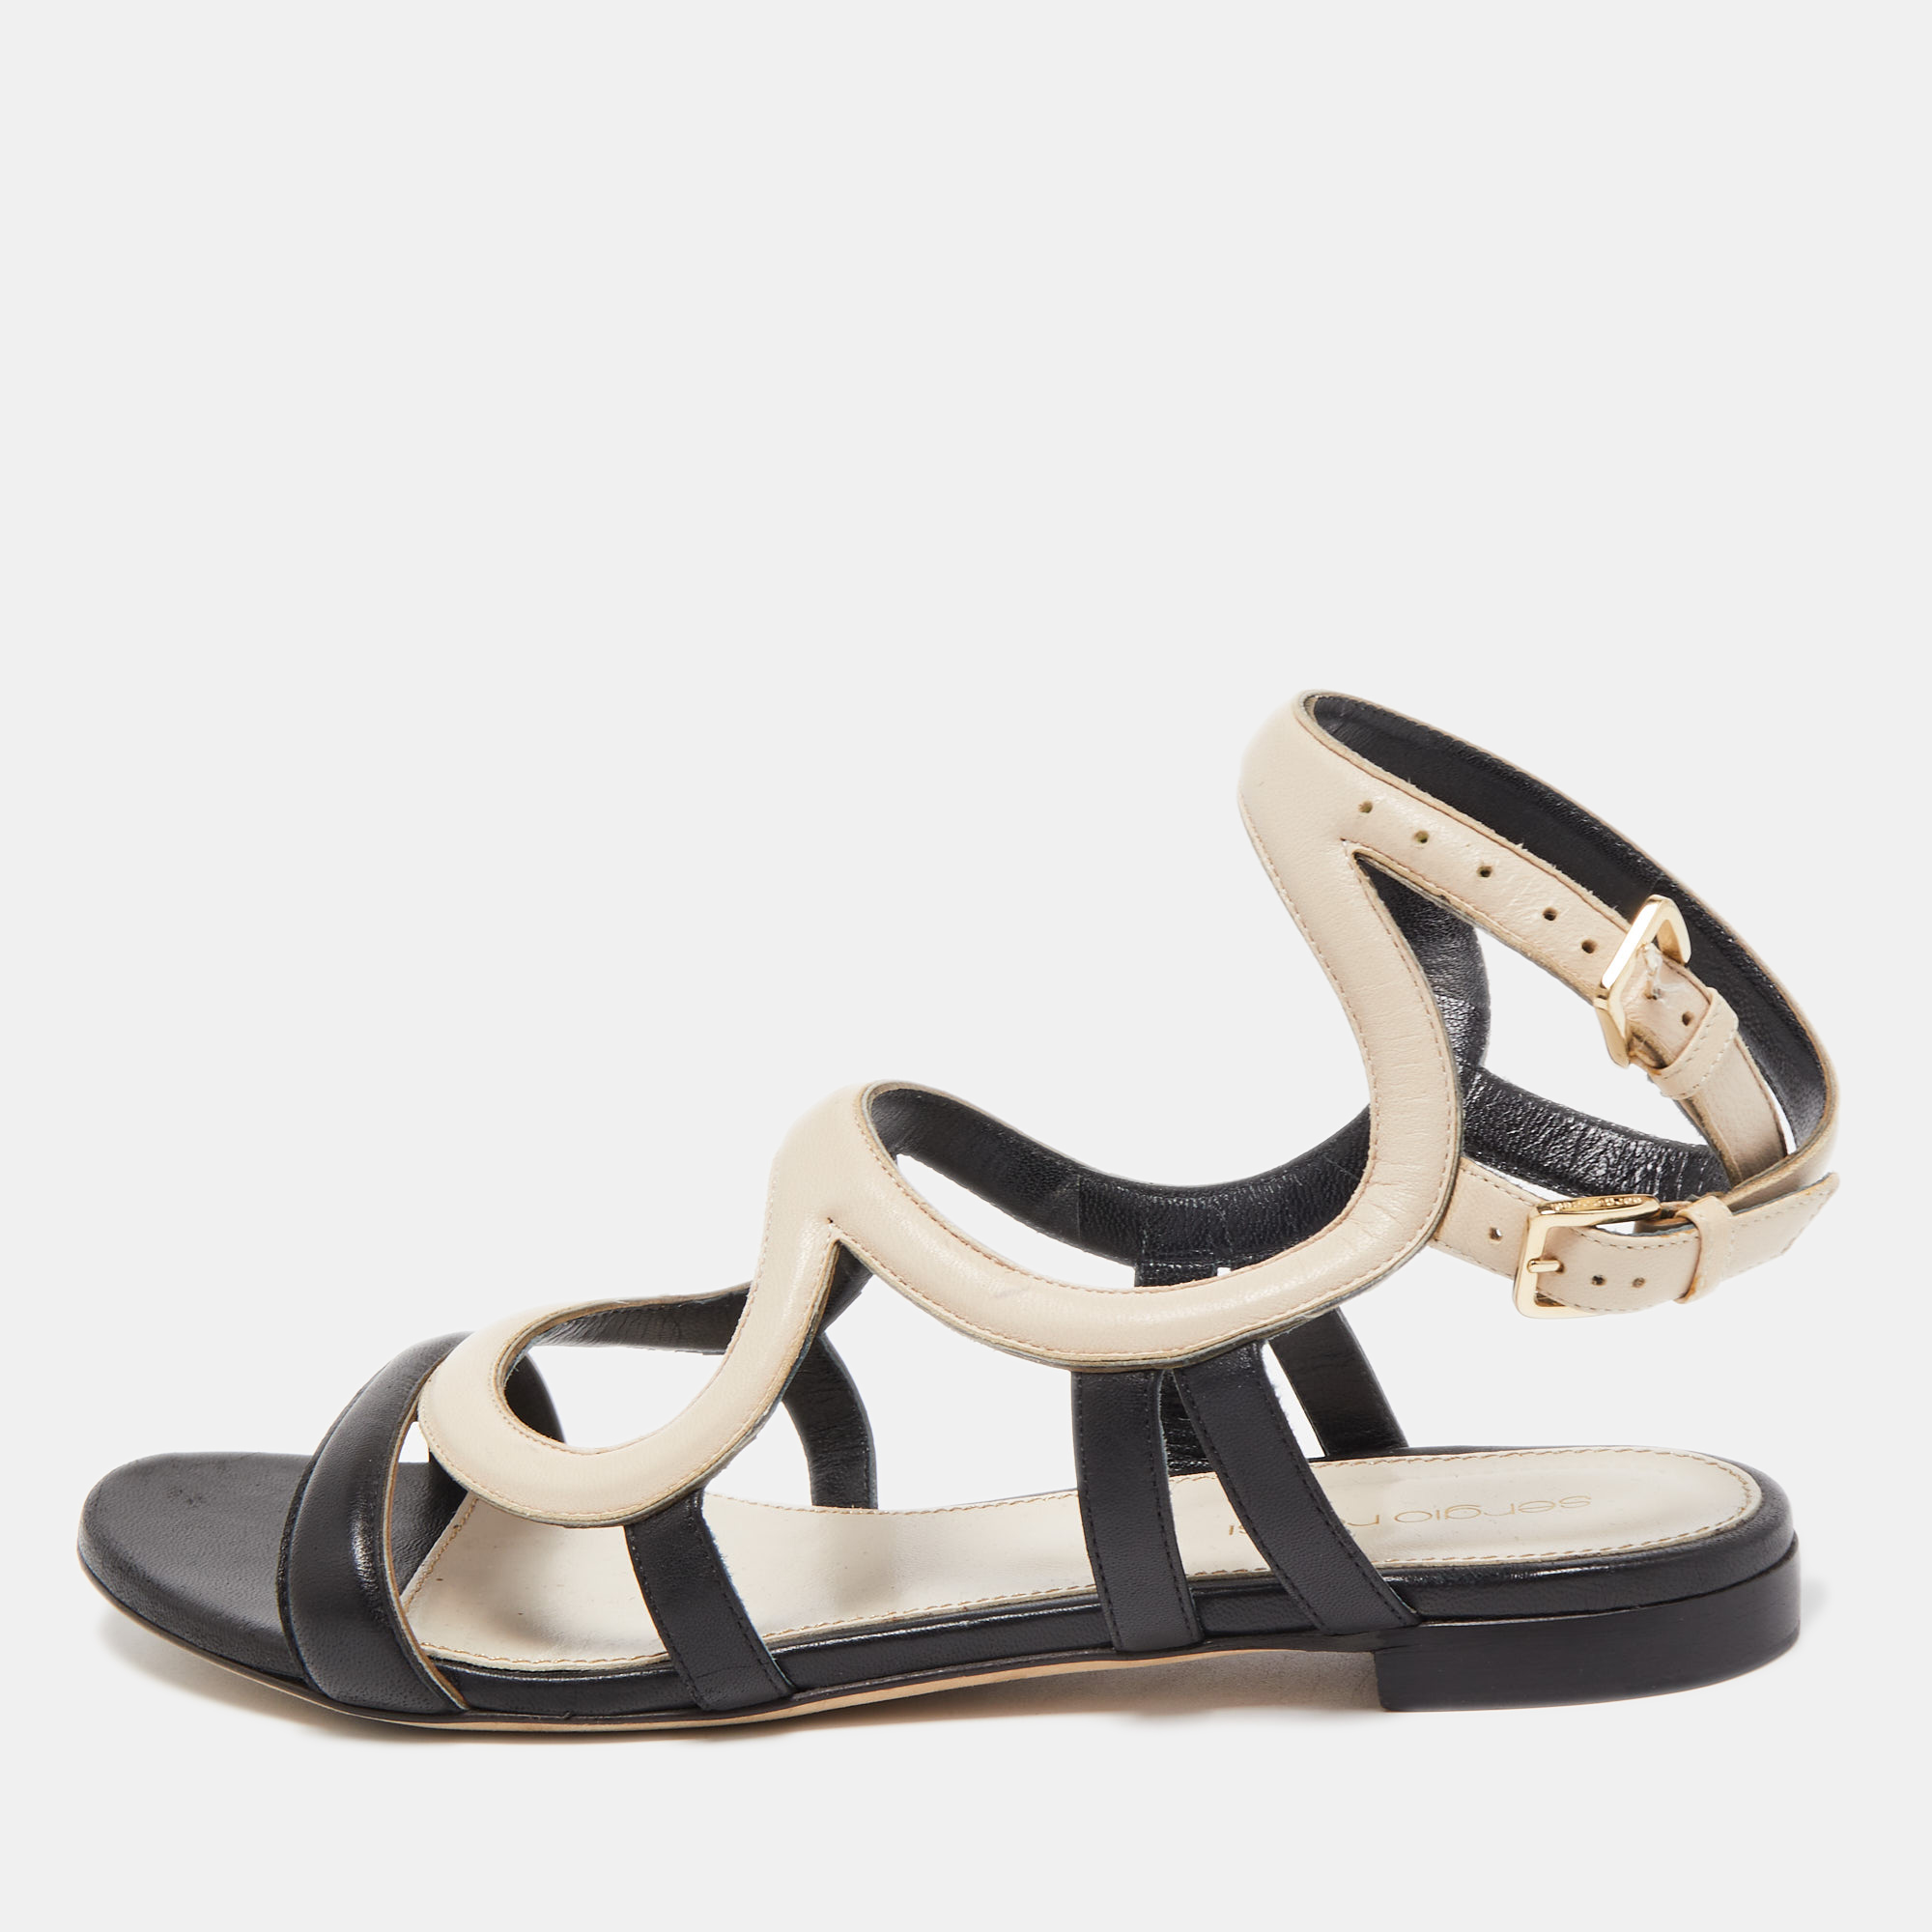 Sergio Rossi Black/Beige Leather Flat Ankle Strap Sandals Size 39